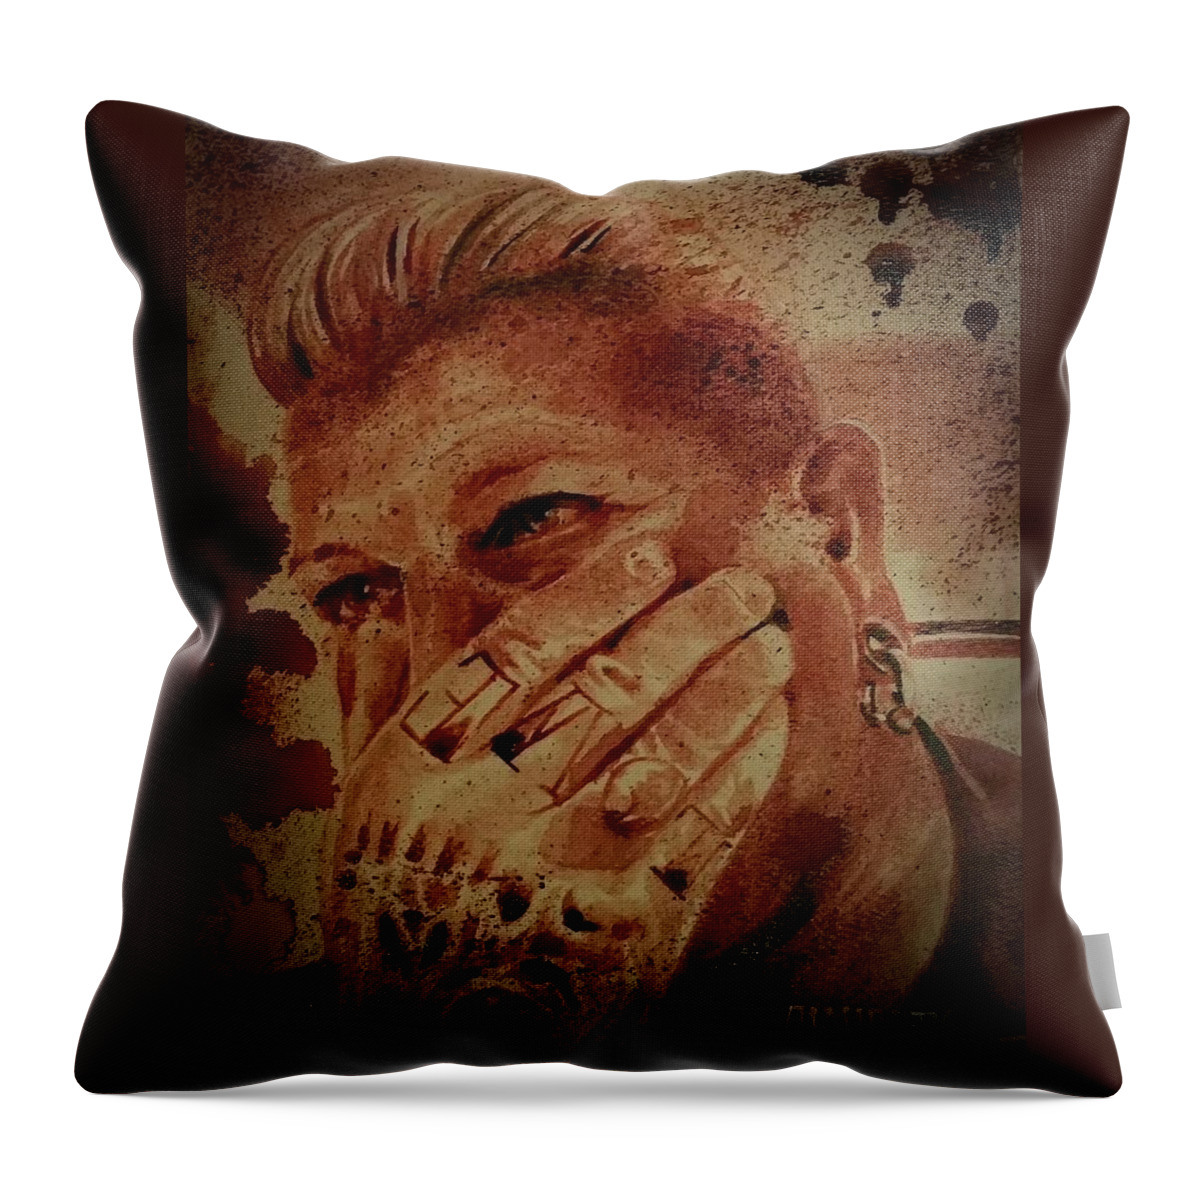 Chris Kross Throw Pillow featuring the painting Portrait of Chris Kross by Ryan Almighty